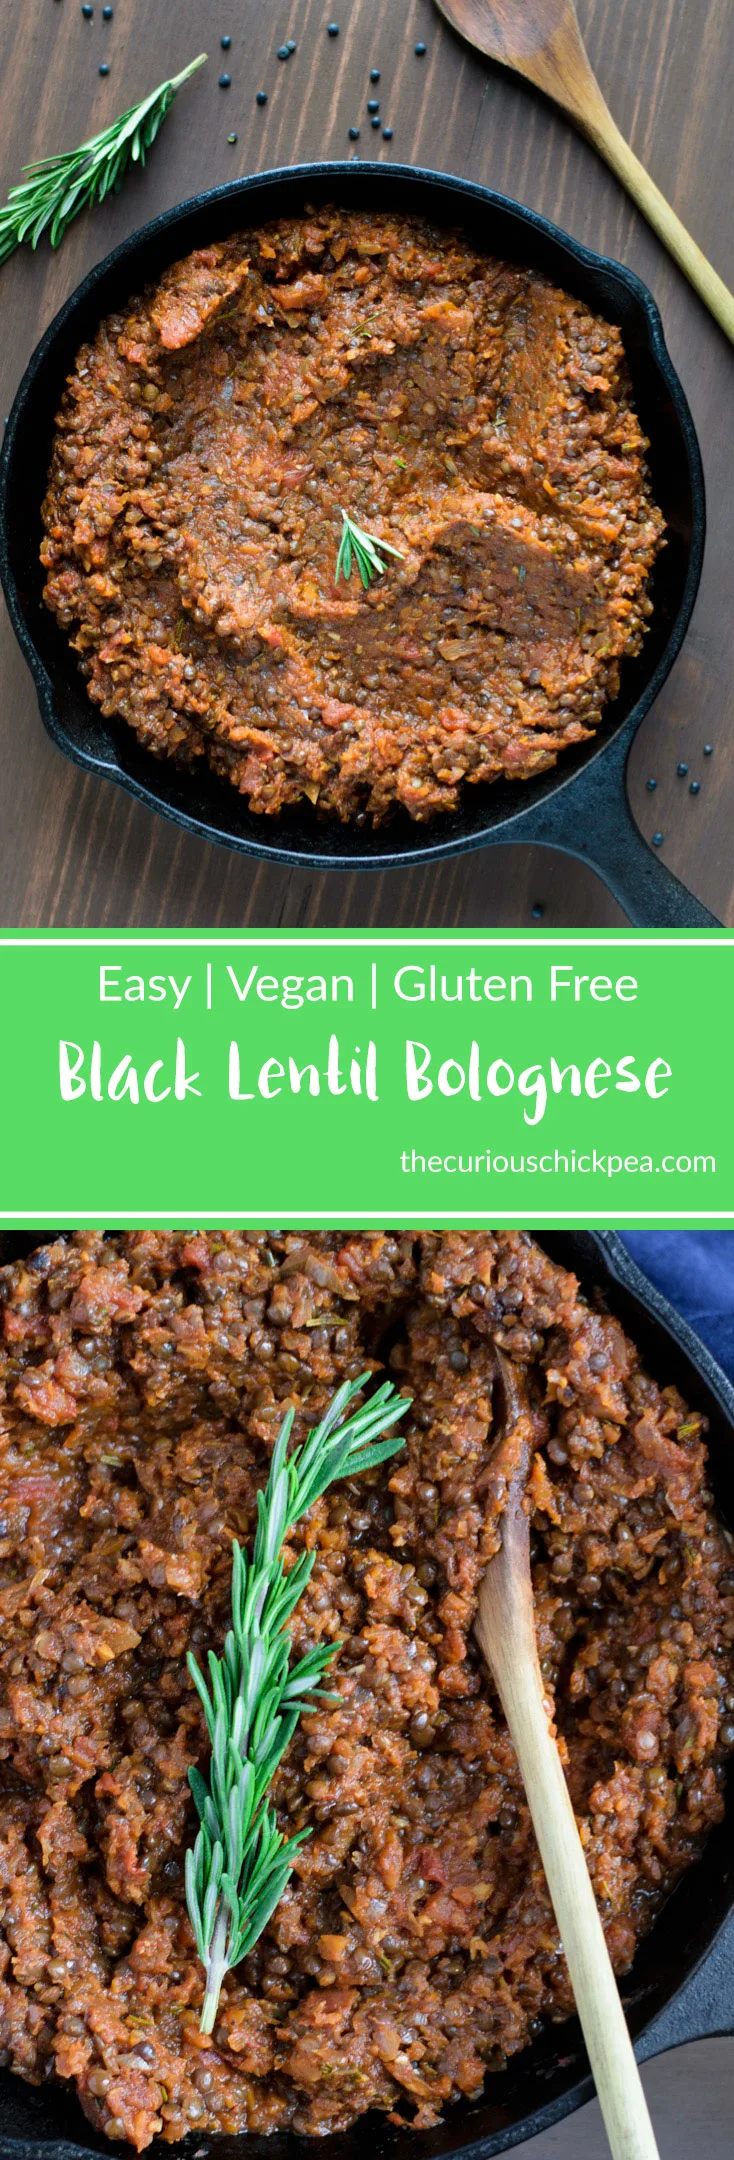 Black Lentil Bolognese | Easy, vegan, gluten free. This bolognese uses black lentils for a meaty texture, and is slowly simmered to bring out the deepest and richest flavors from the sauce. It's even better on the second day! | thecuriouschickpea.com #vegan #bolognese